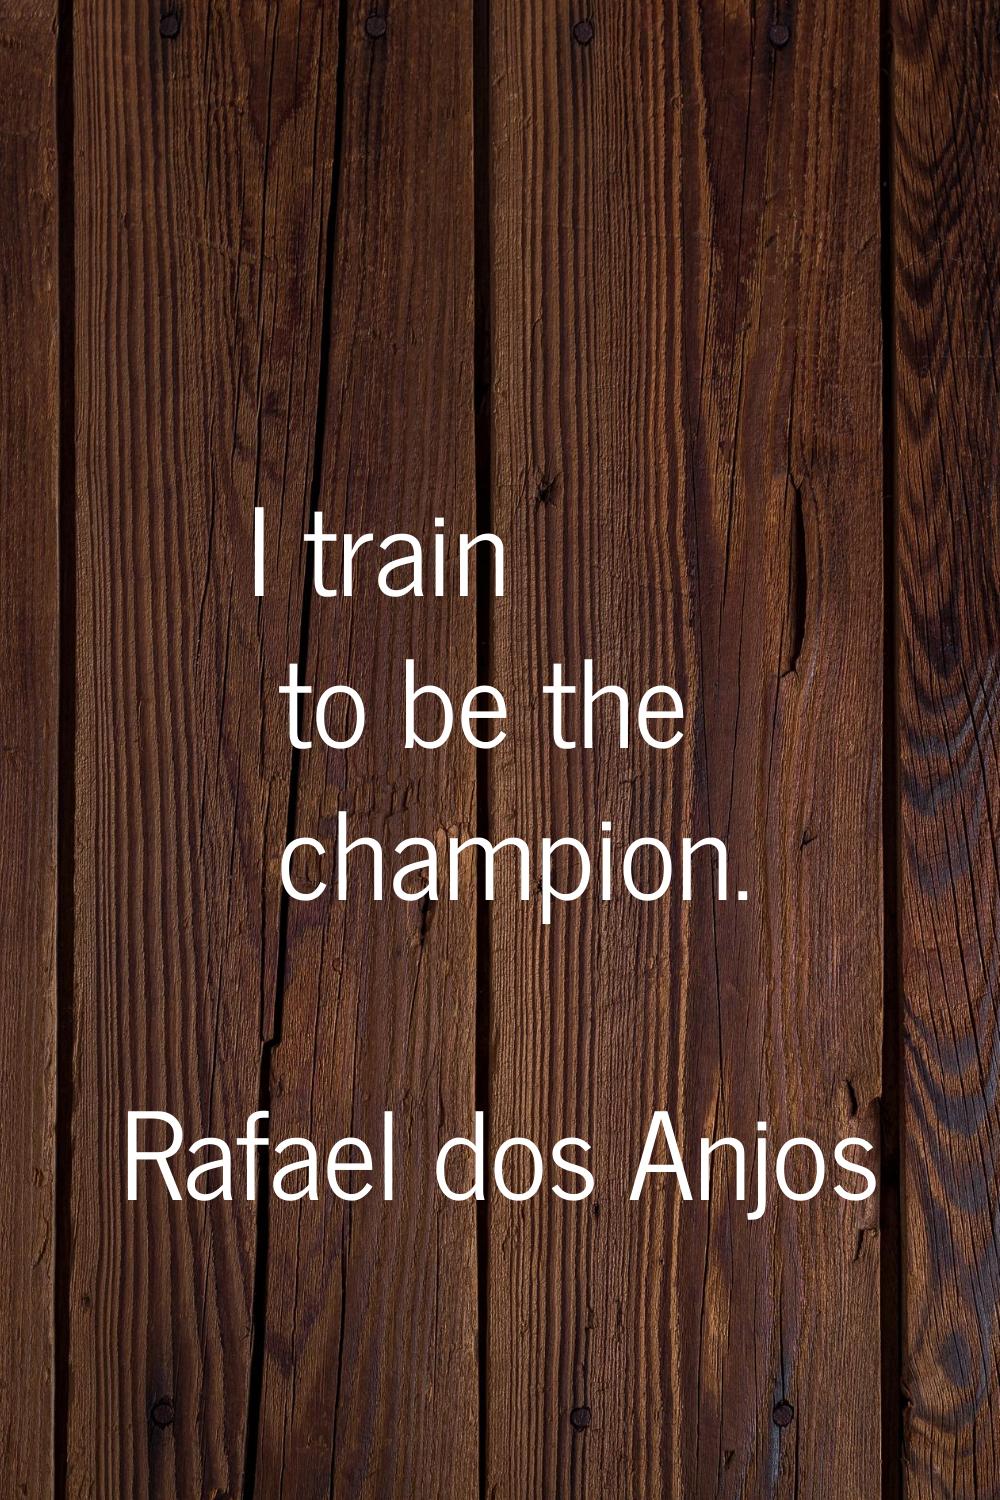 I train to be the champion.